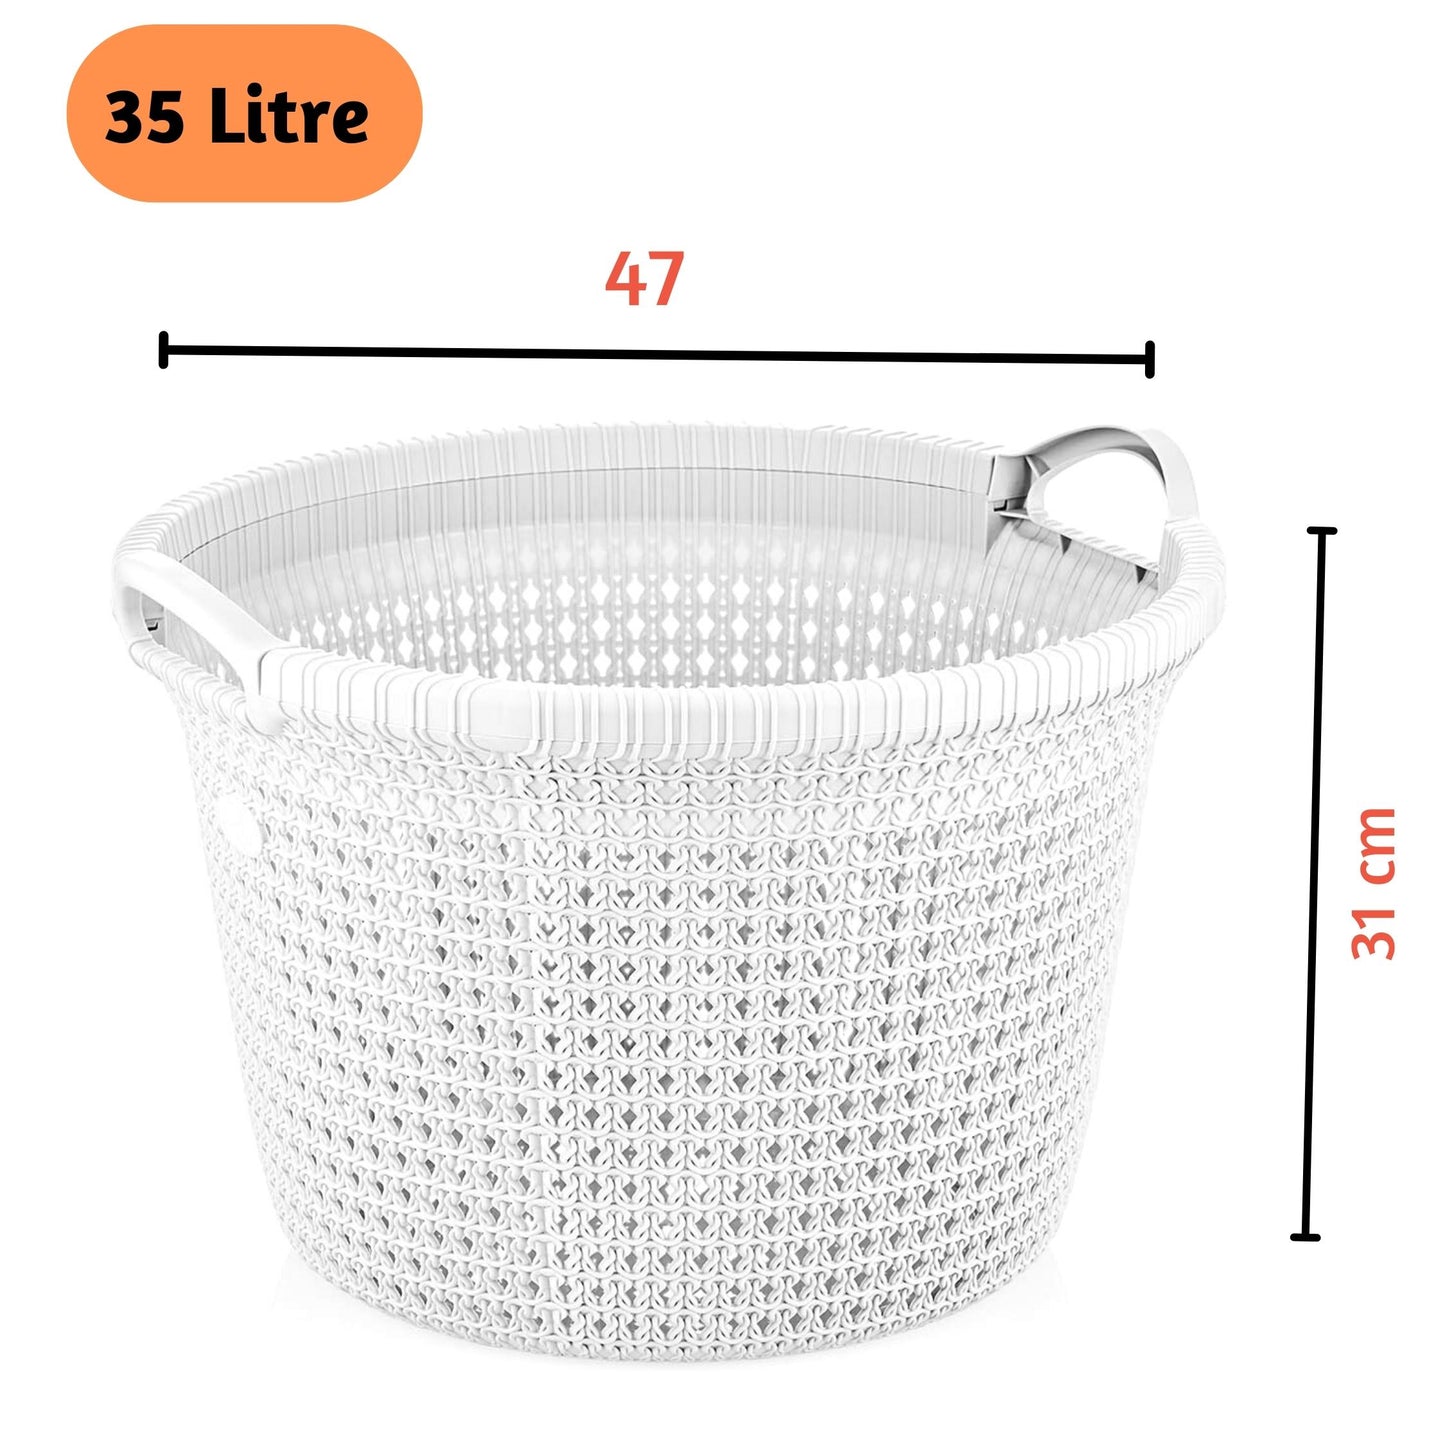 35 Litre Round Wash Basket for Laundry with Handles Spacious Rattan Design